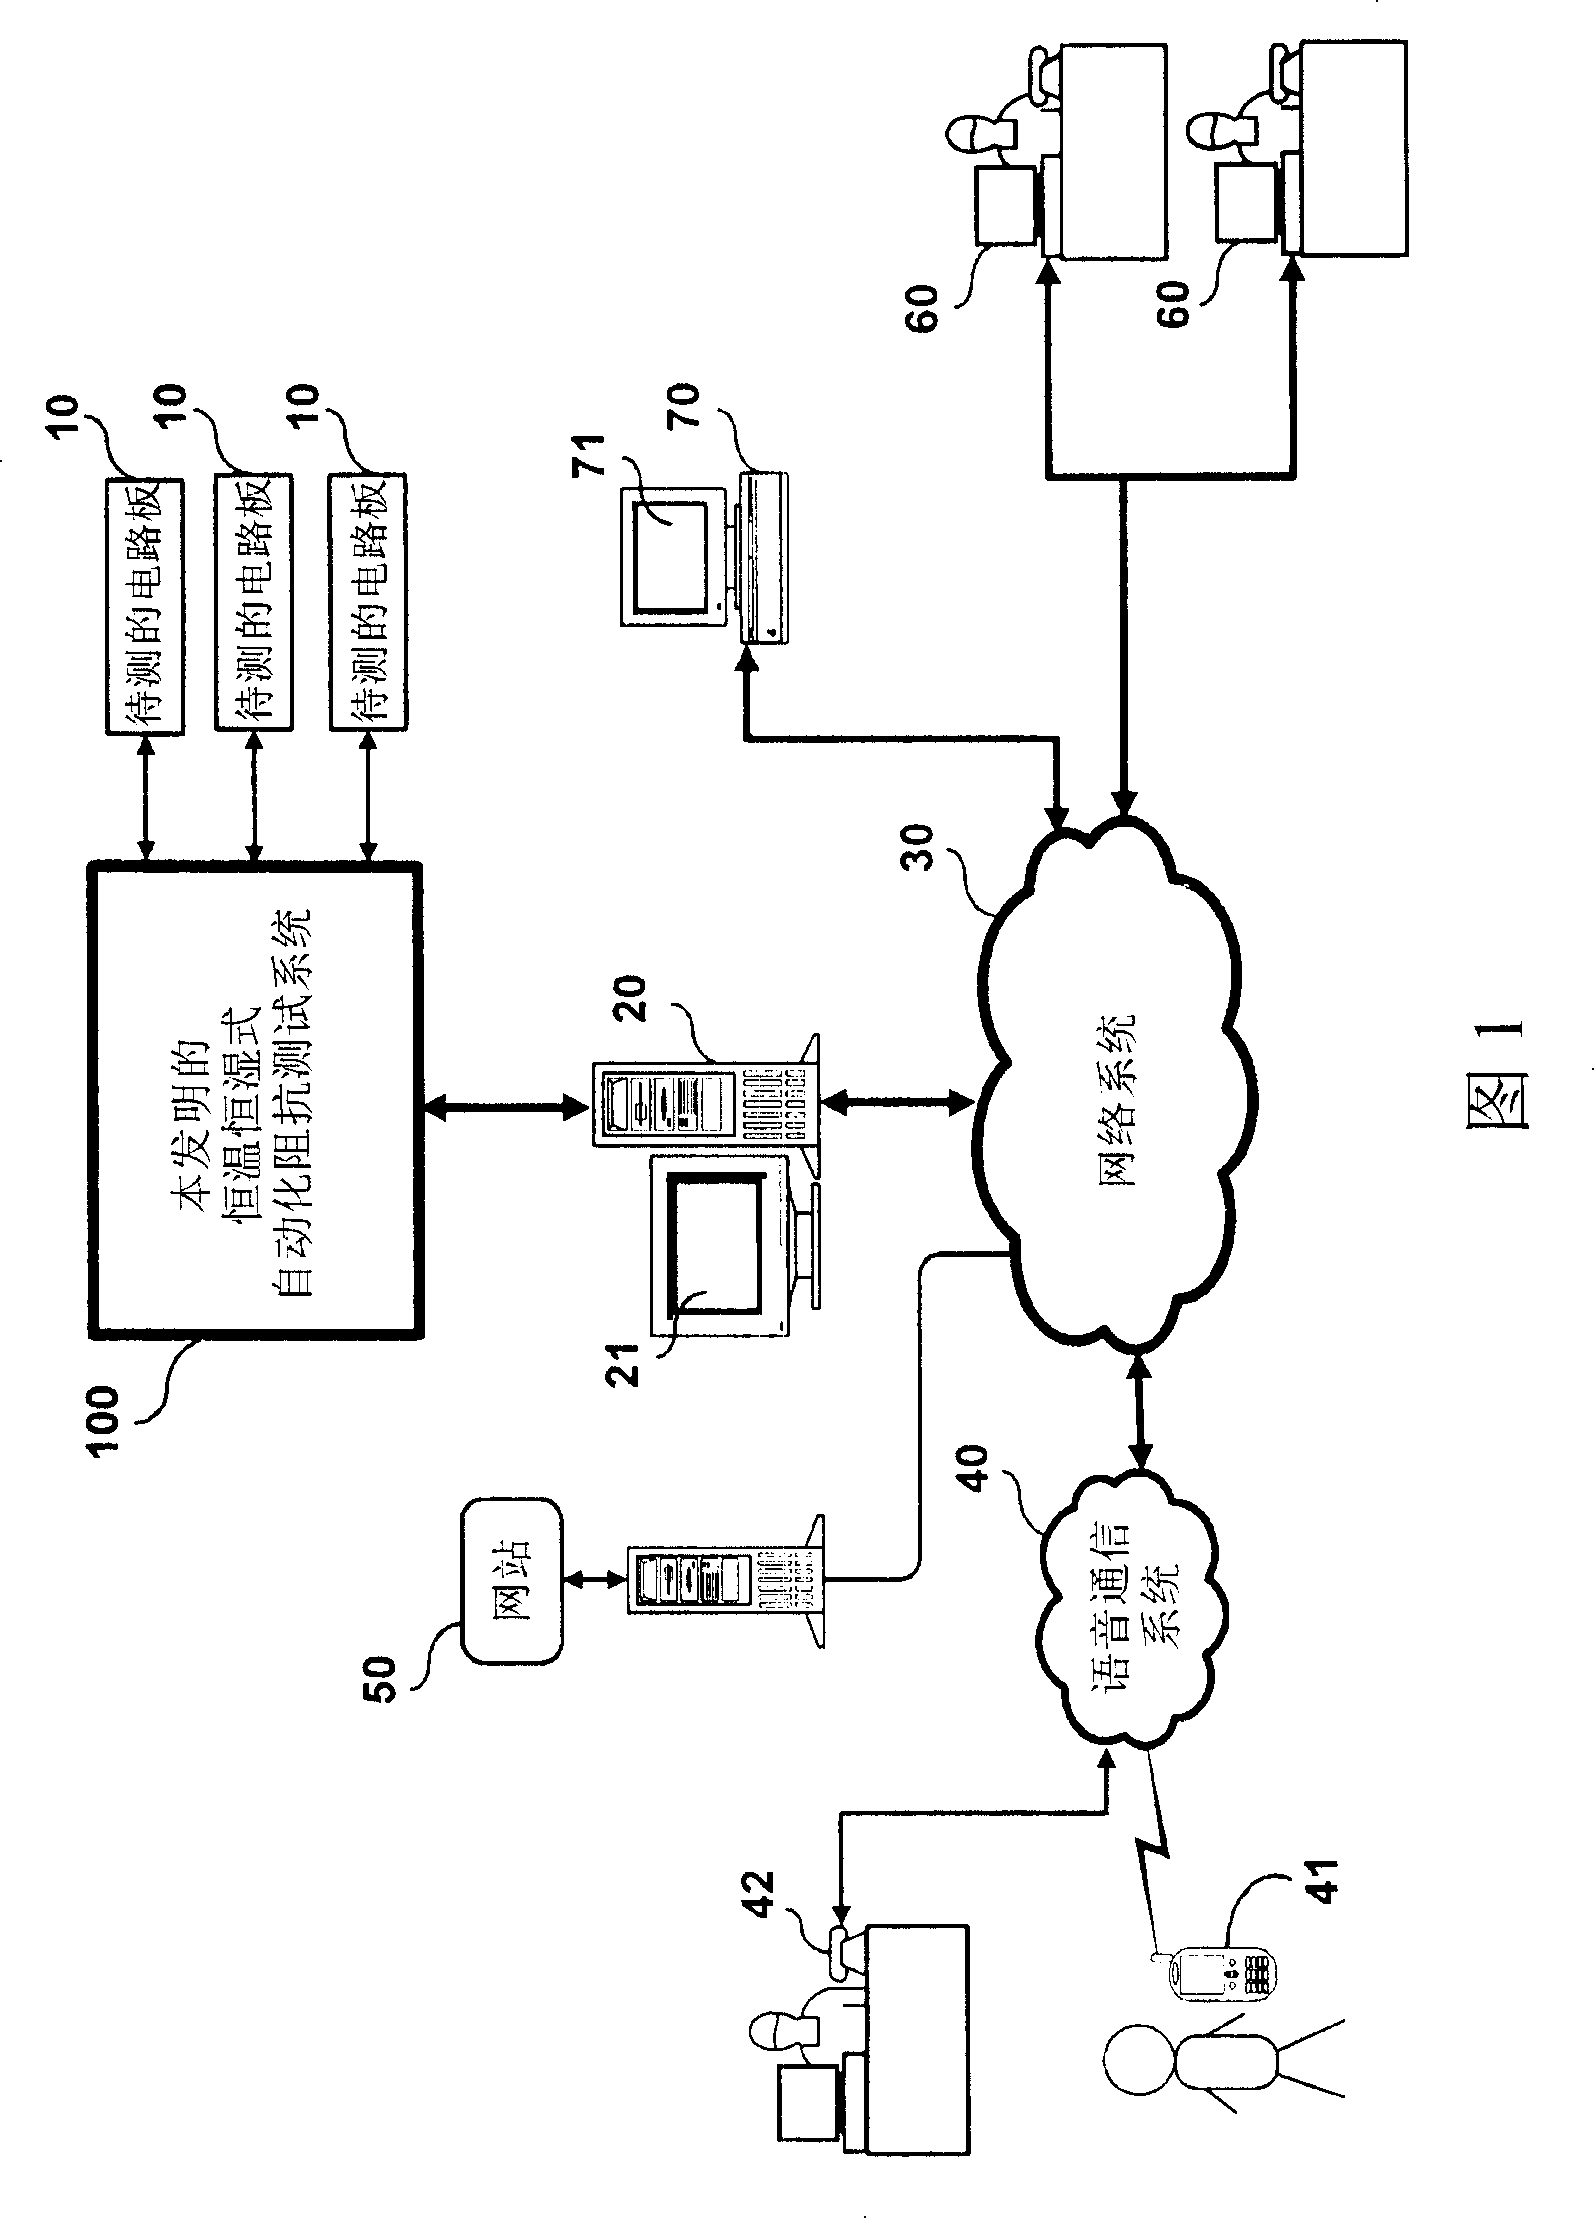 Constant temperature and constant wetting type automatization impedance test system